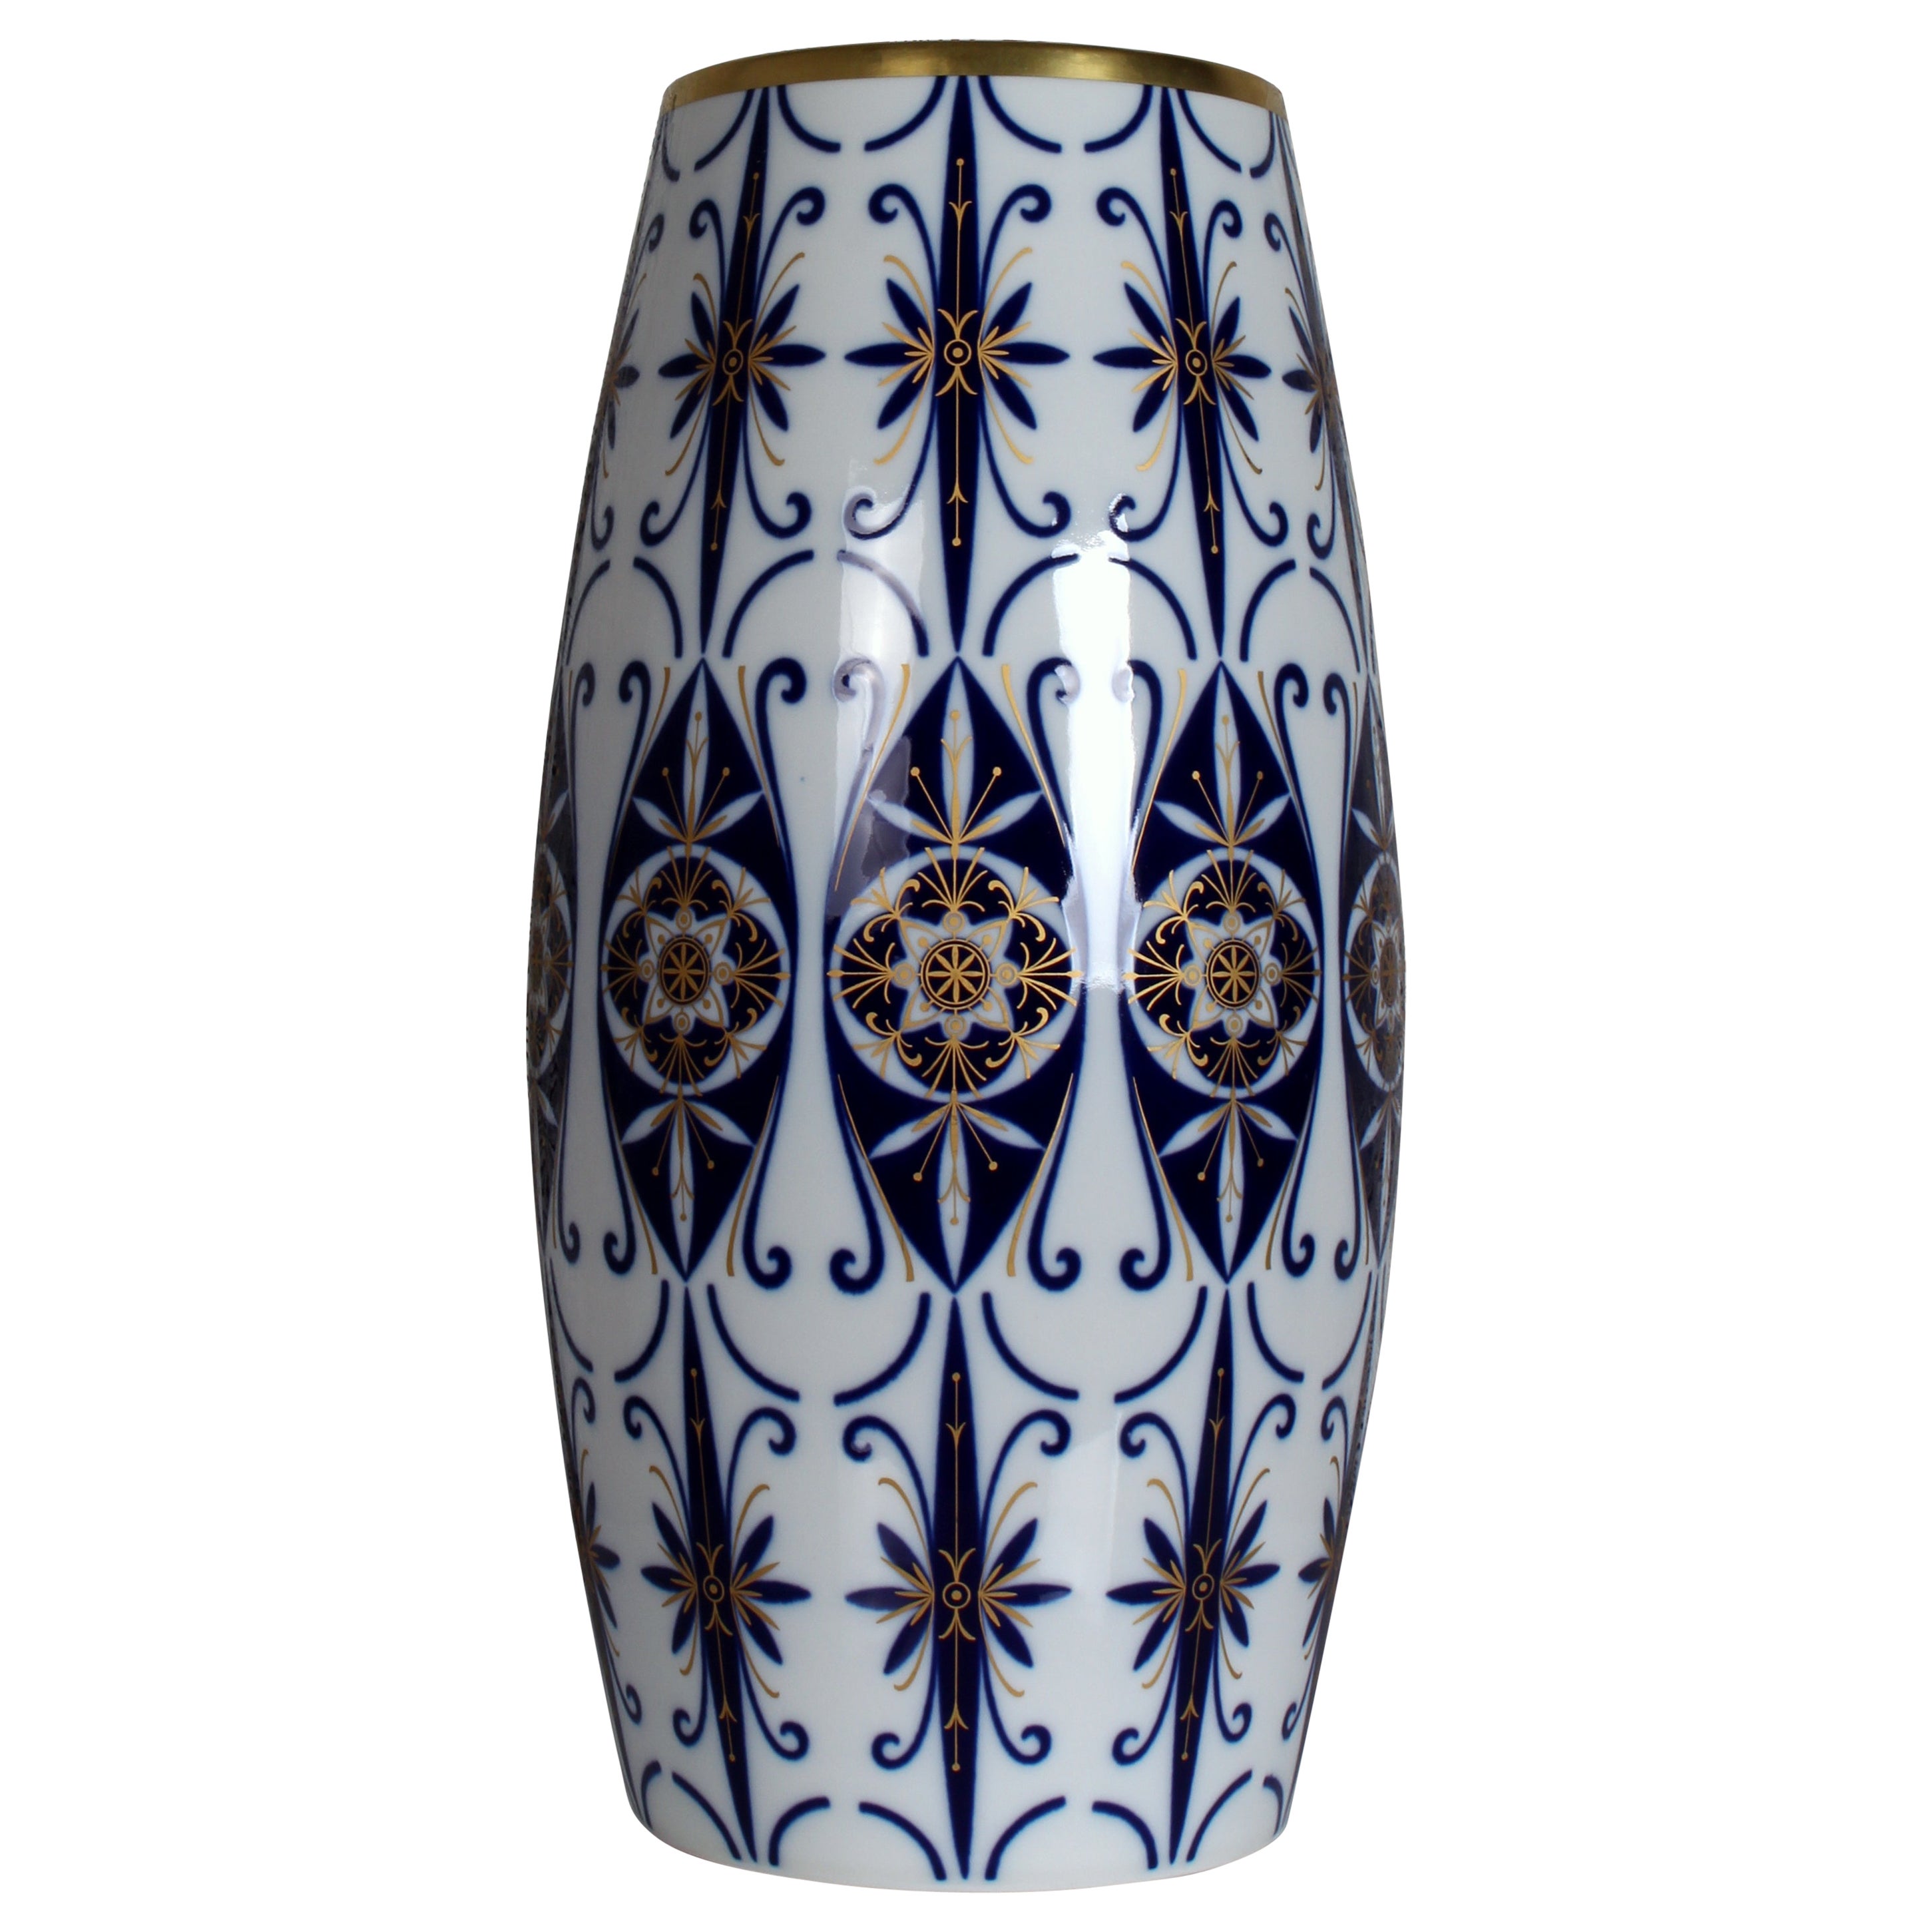 a real beauty and an absolute rare piece as this is the luxury gilded edition of Schumann Kobalt floor vase range 

a very elegant Porcelain SCHUMANN Arzberg midcentury Classic Floor Vase Real Cobalt - Gold
height 48cm - diam. rim: 17cm - weight: